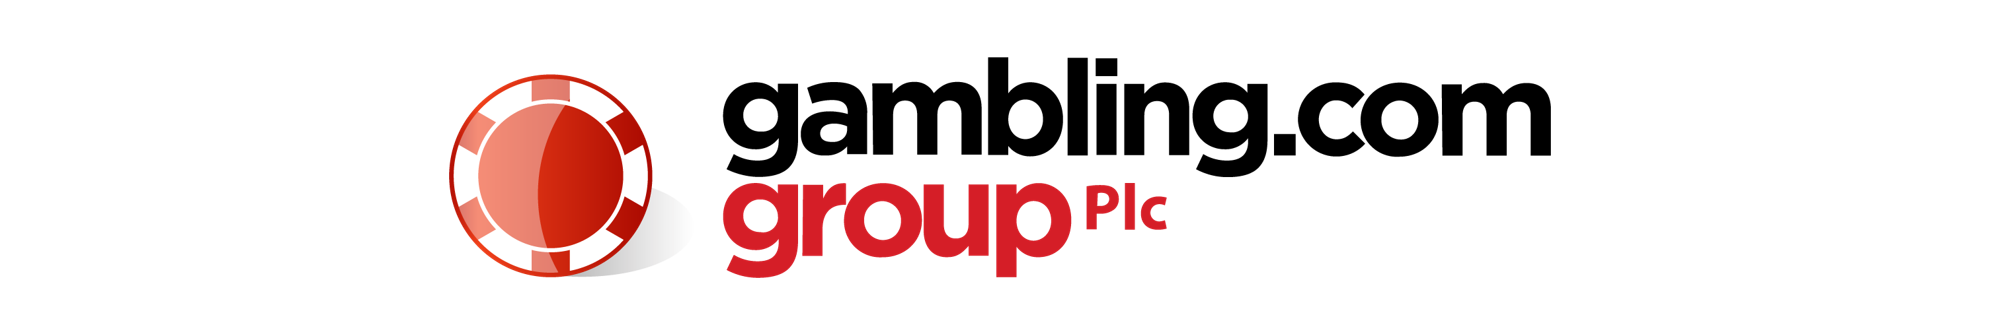 Gambling.com Group Secures $15.5M Growth Investment from Edison Partners